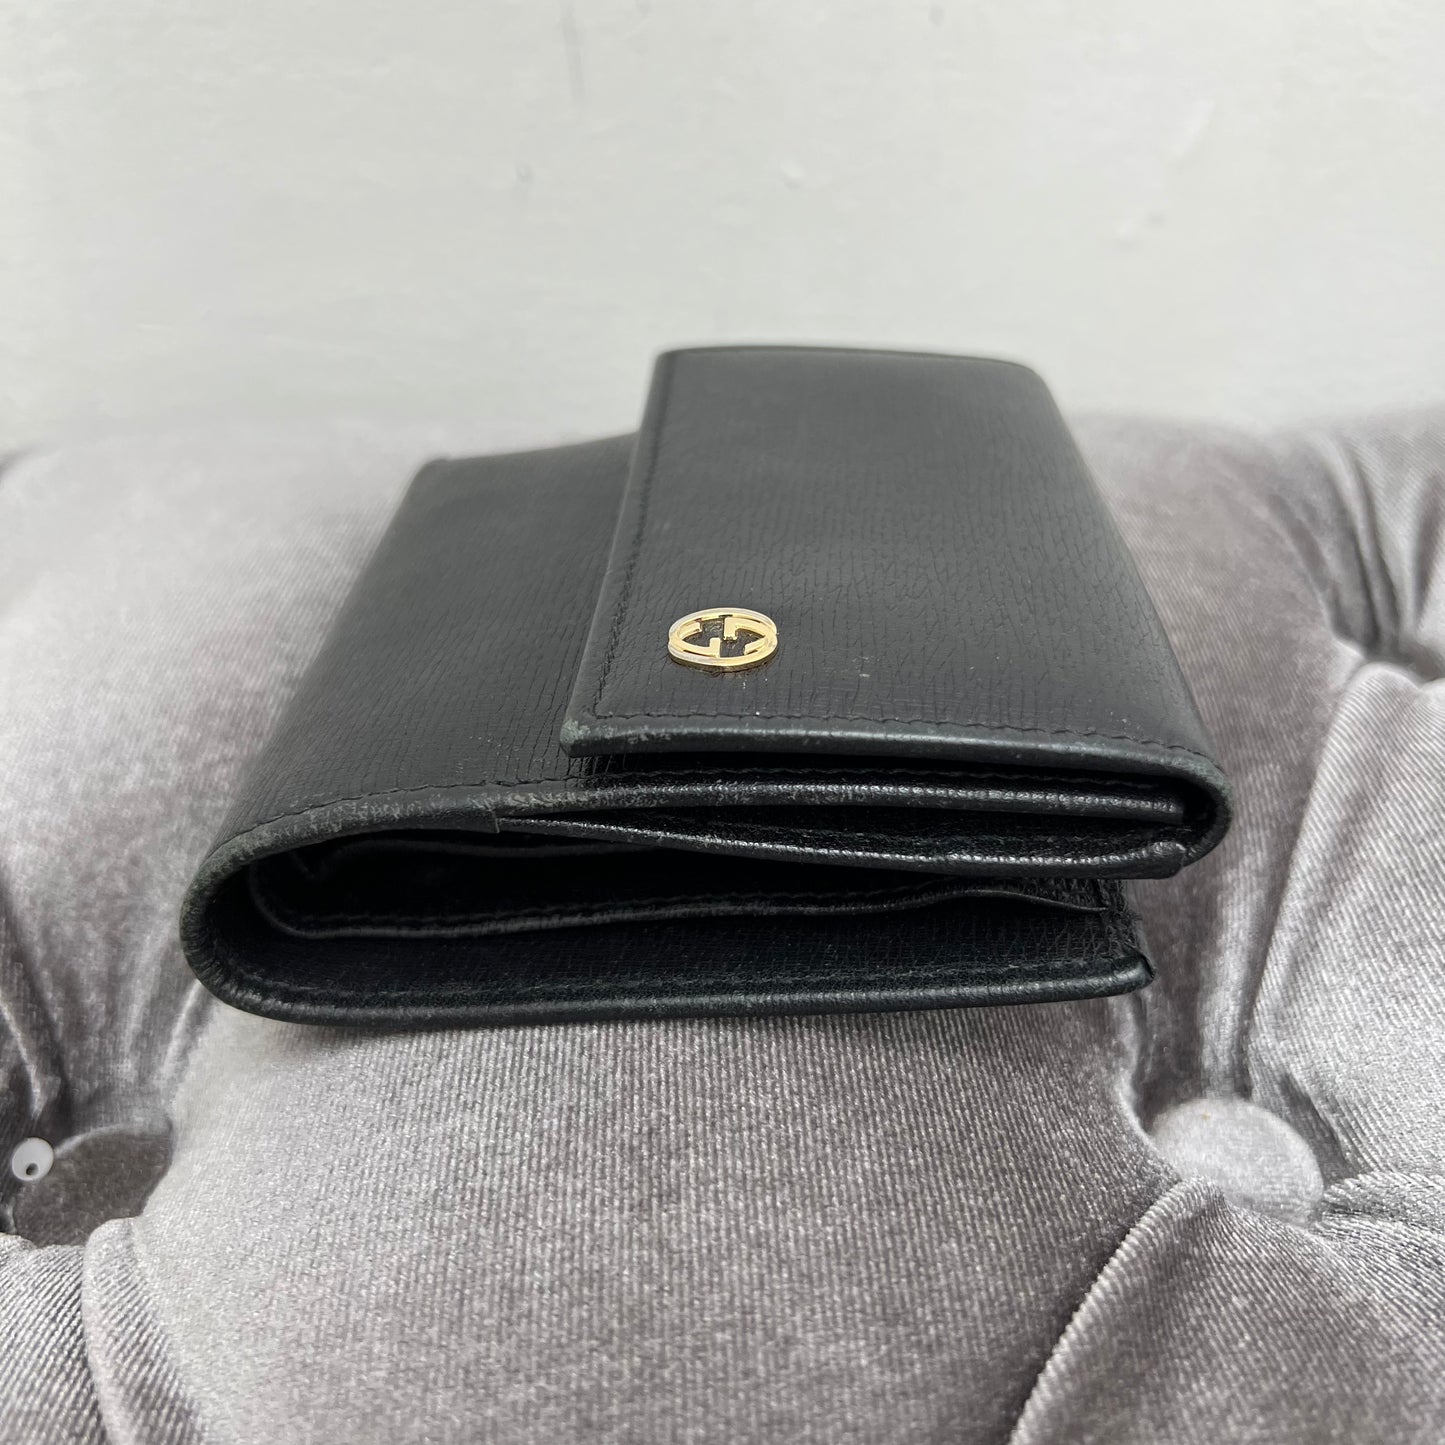 Gucci Compact Leather Wallet